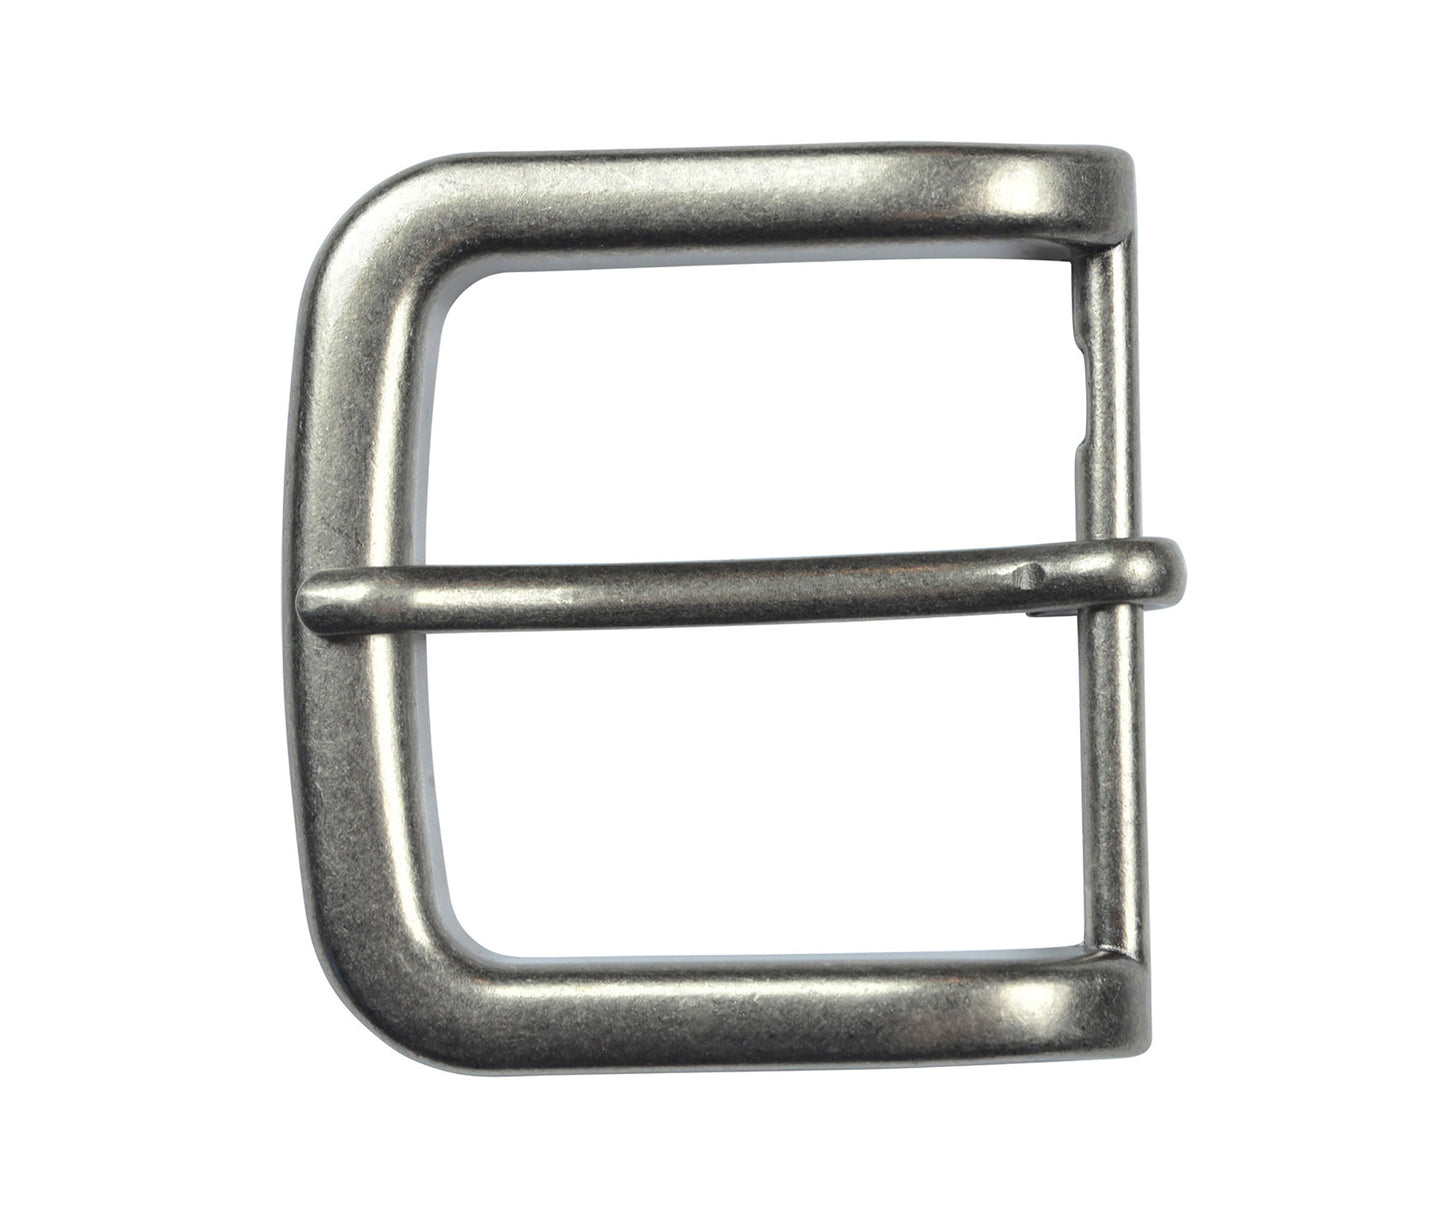 TBS-BU4076 - Silver Finish Pin Buckle Fits 1.5" or 38mm Belts